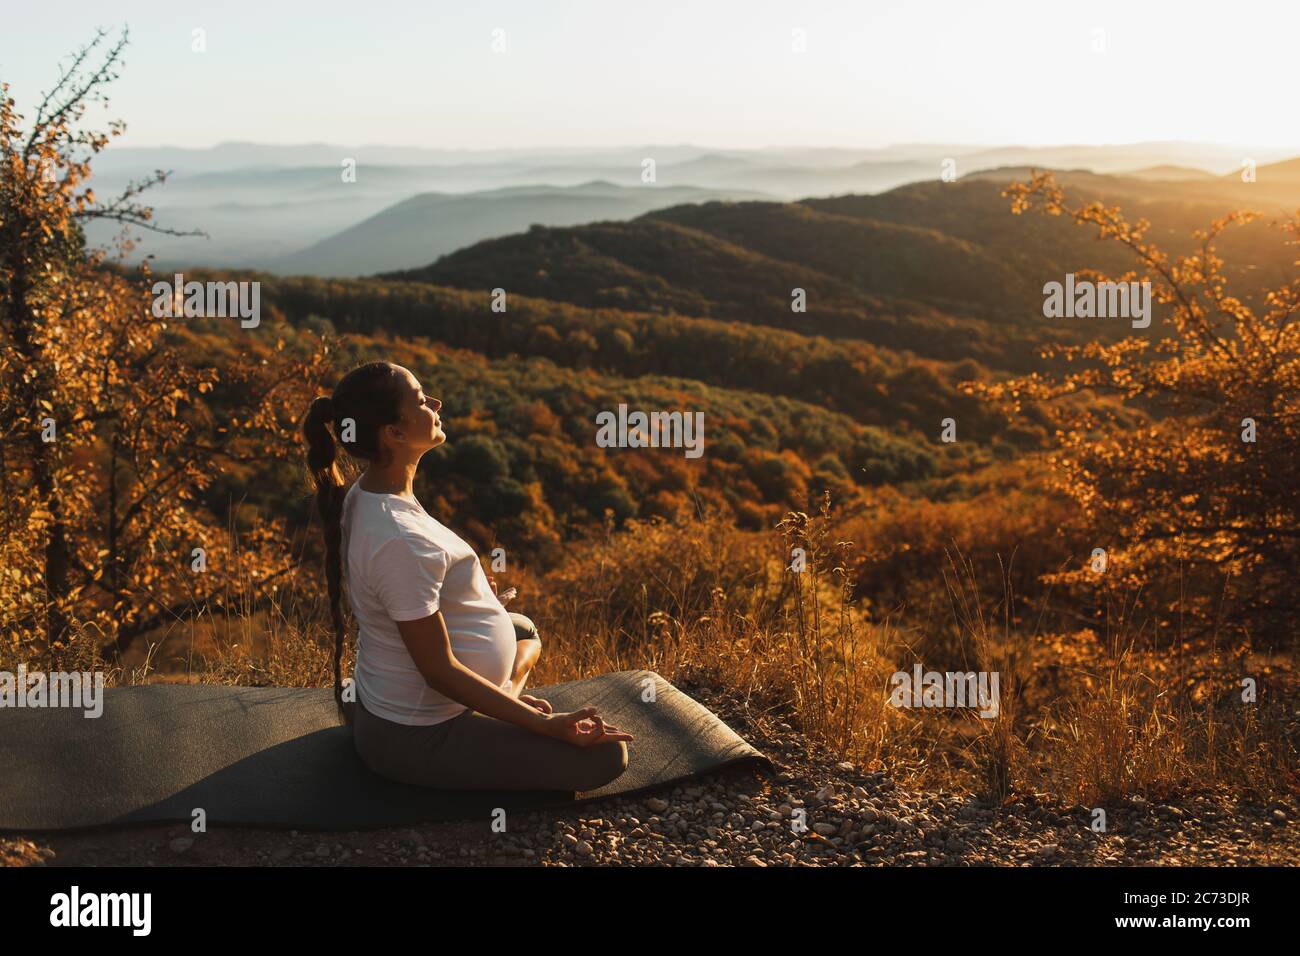 Pregnant woman in lotus position do yoga alone outdoors. Amazing autumn mountain view at sunset. Spiritual maternity concept, natural harmony. Stock Photo